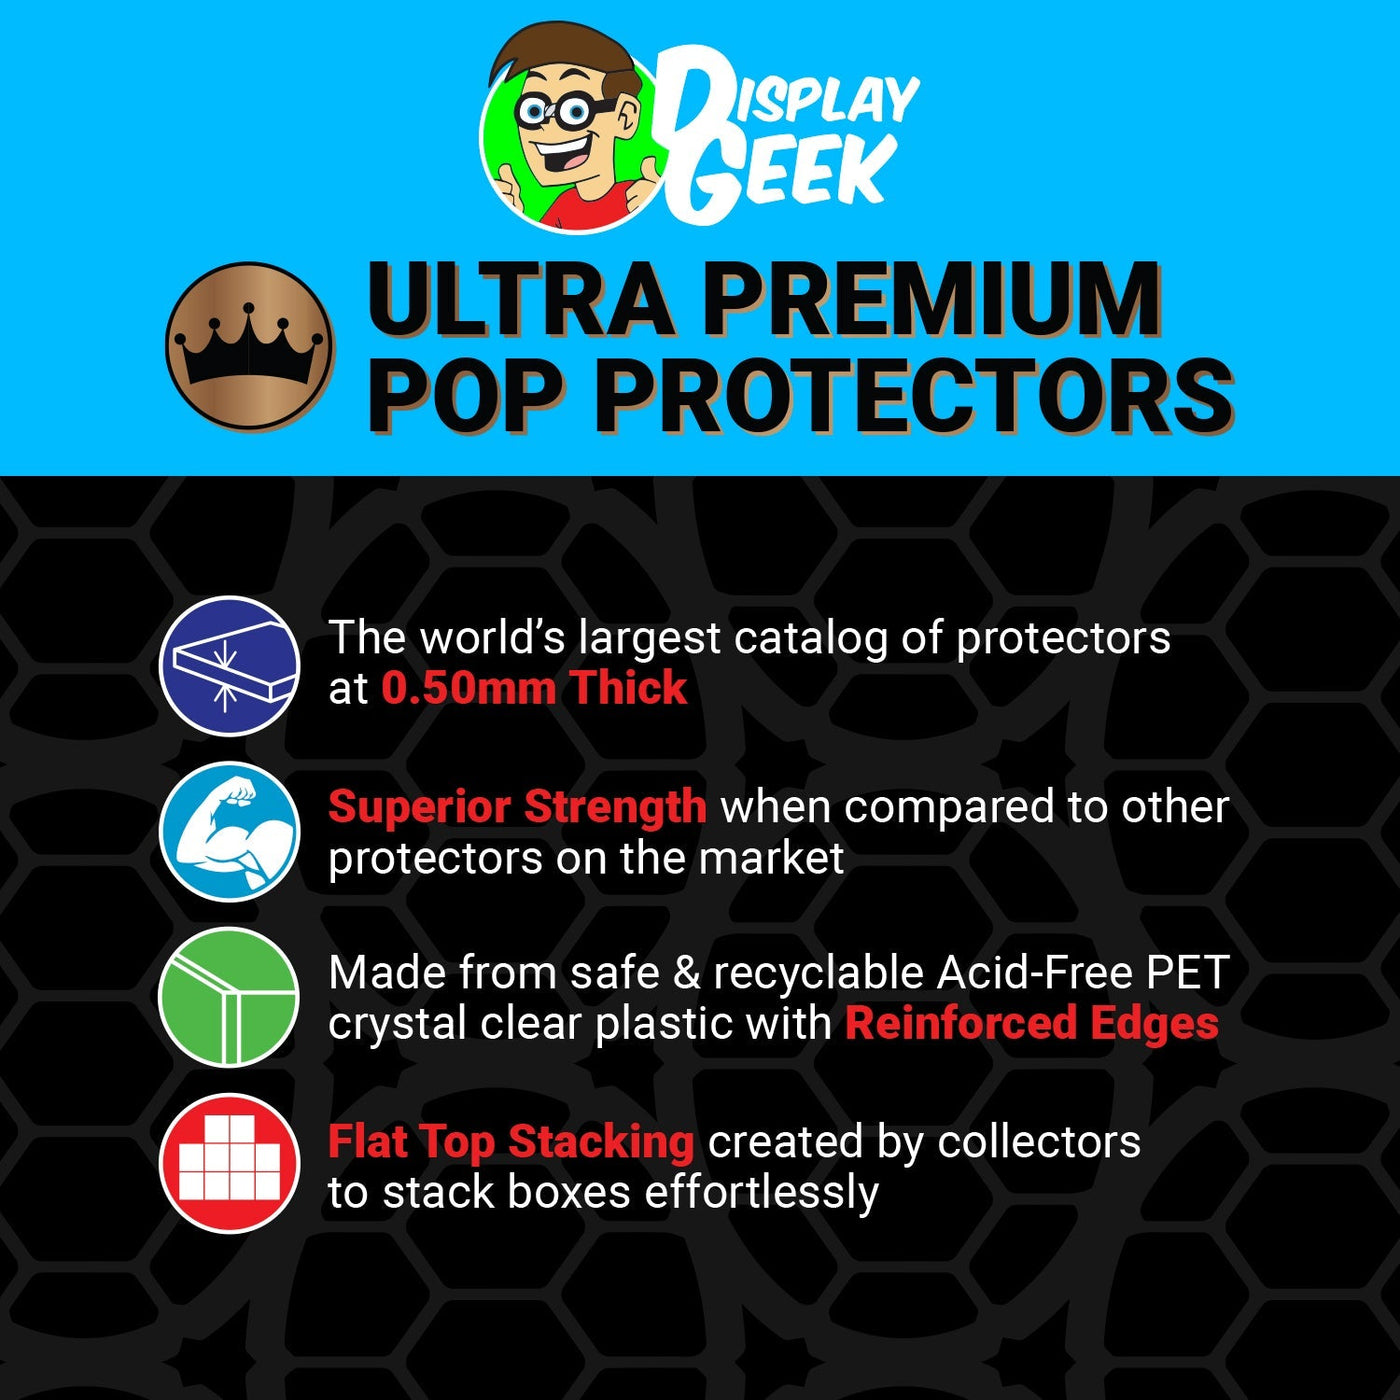 Pop Protector for Bigfoot Snowy Funko Pop Pez on The Protector Guide App by Display Geek